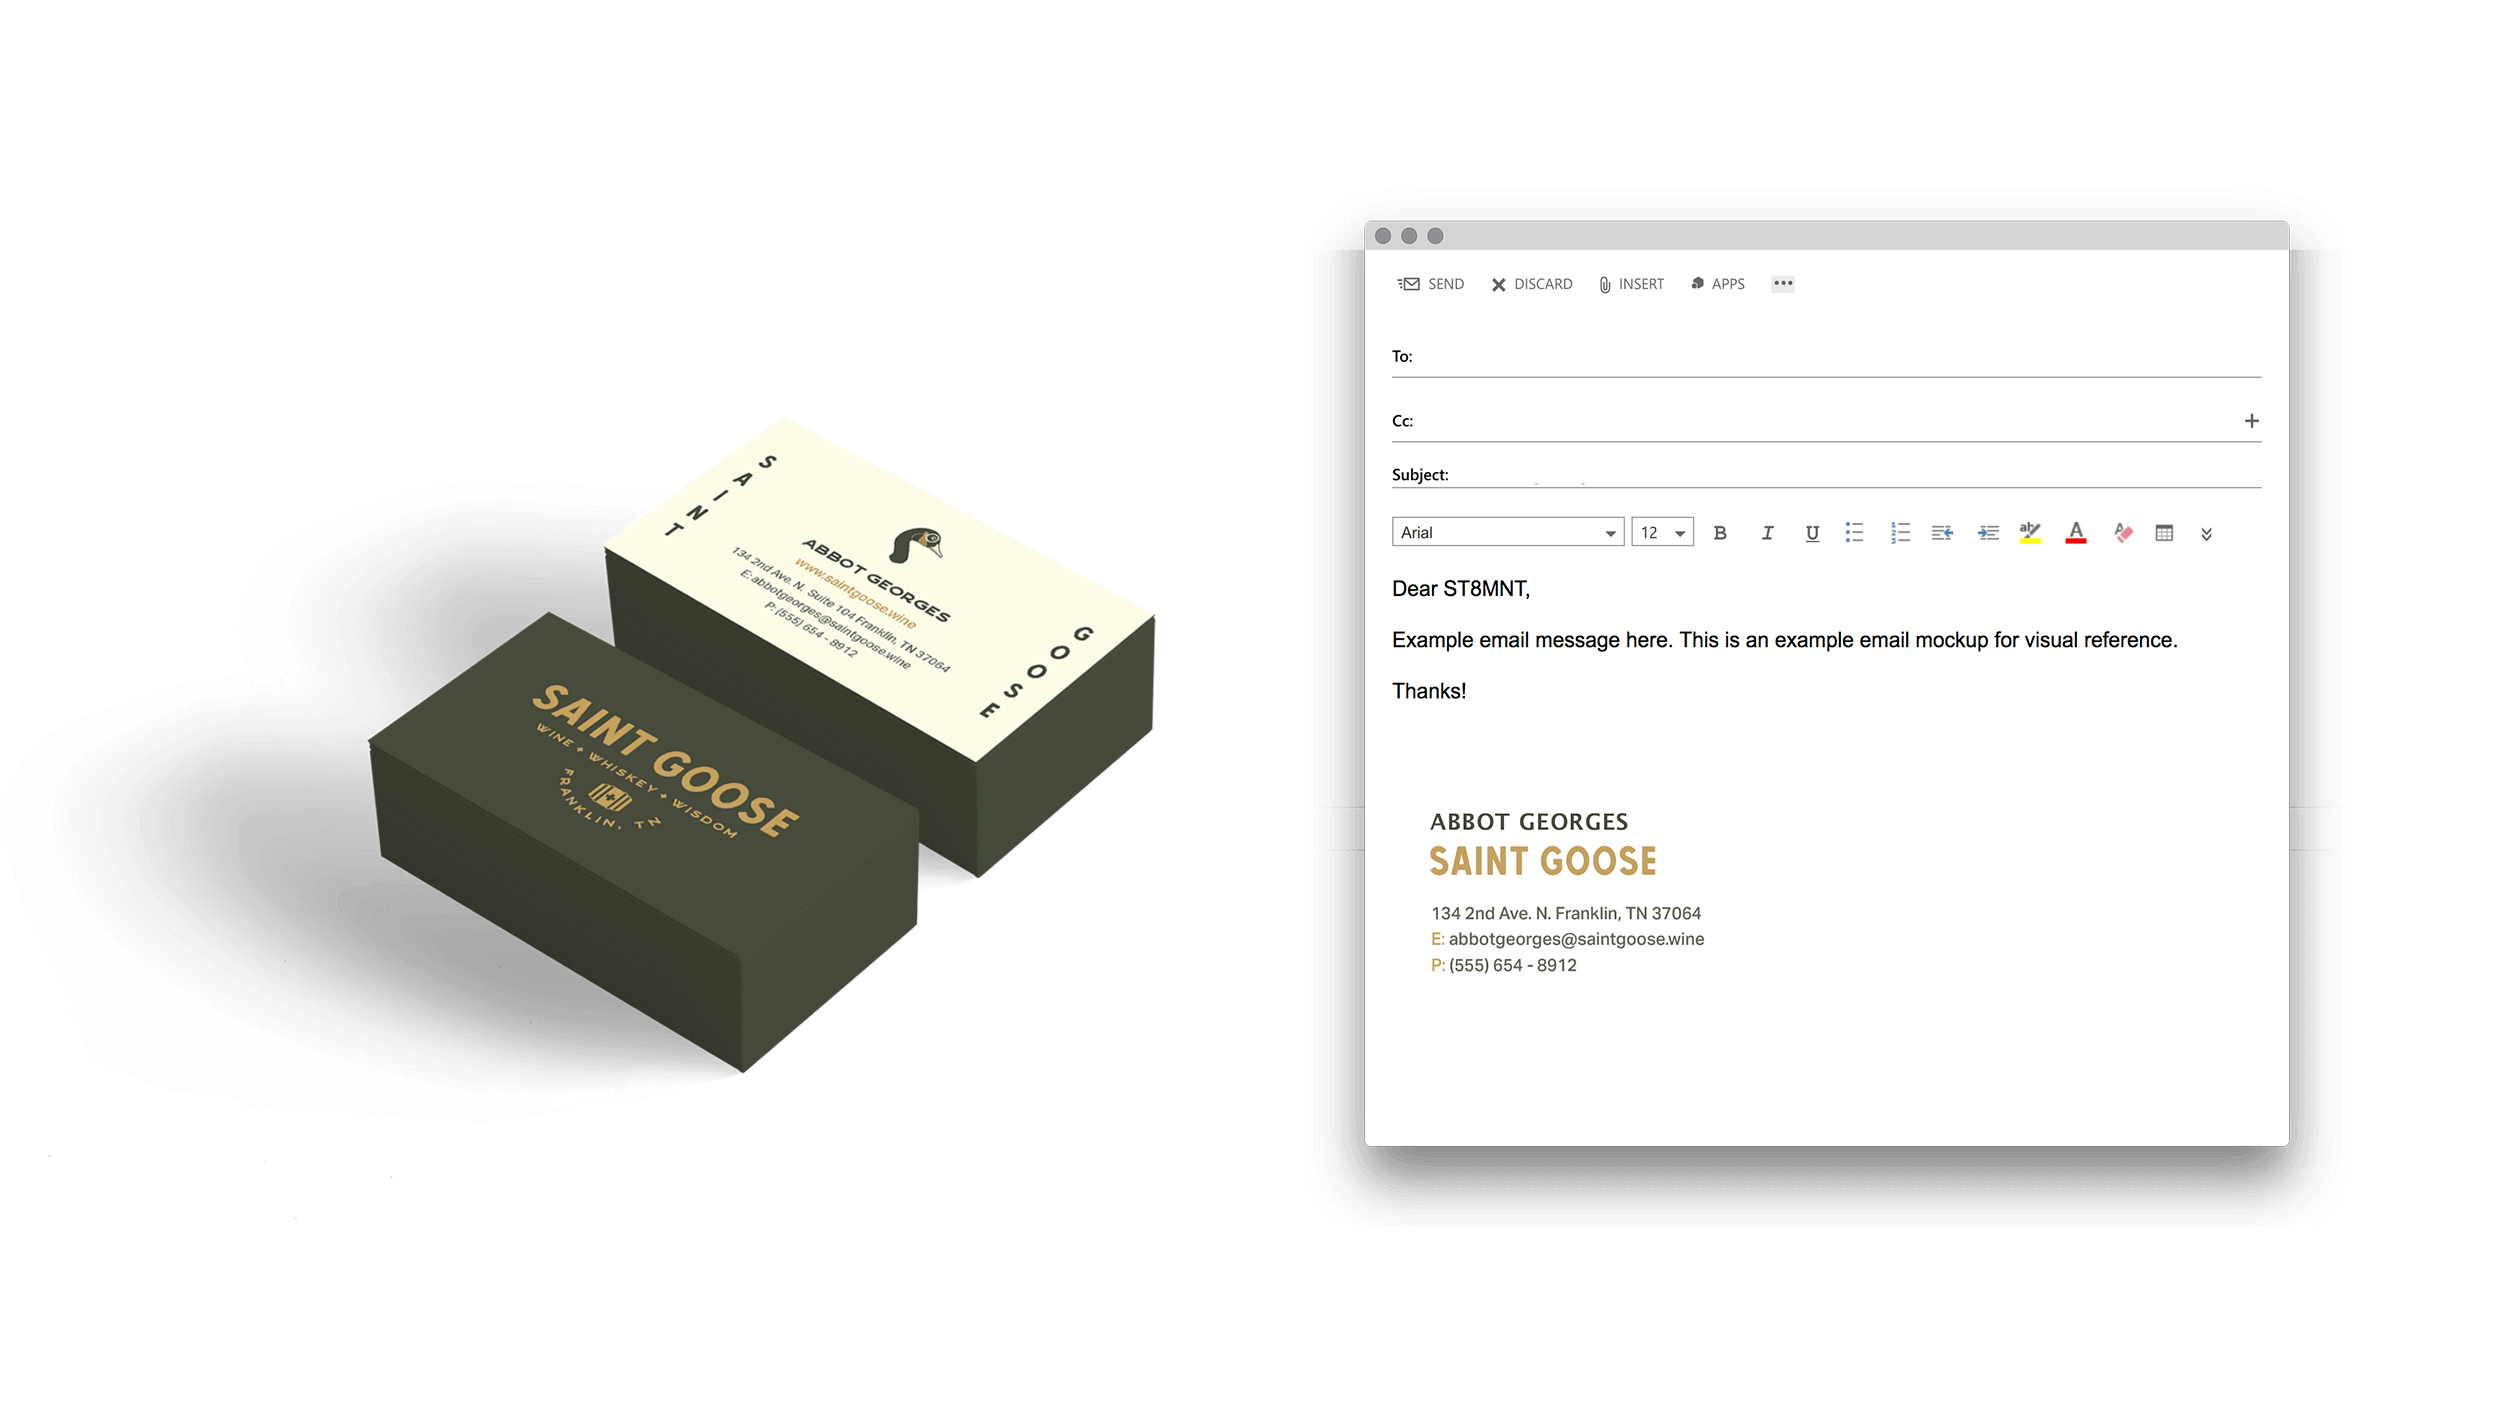 Saint Goose business card mockup on left and digital signature on right